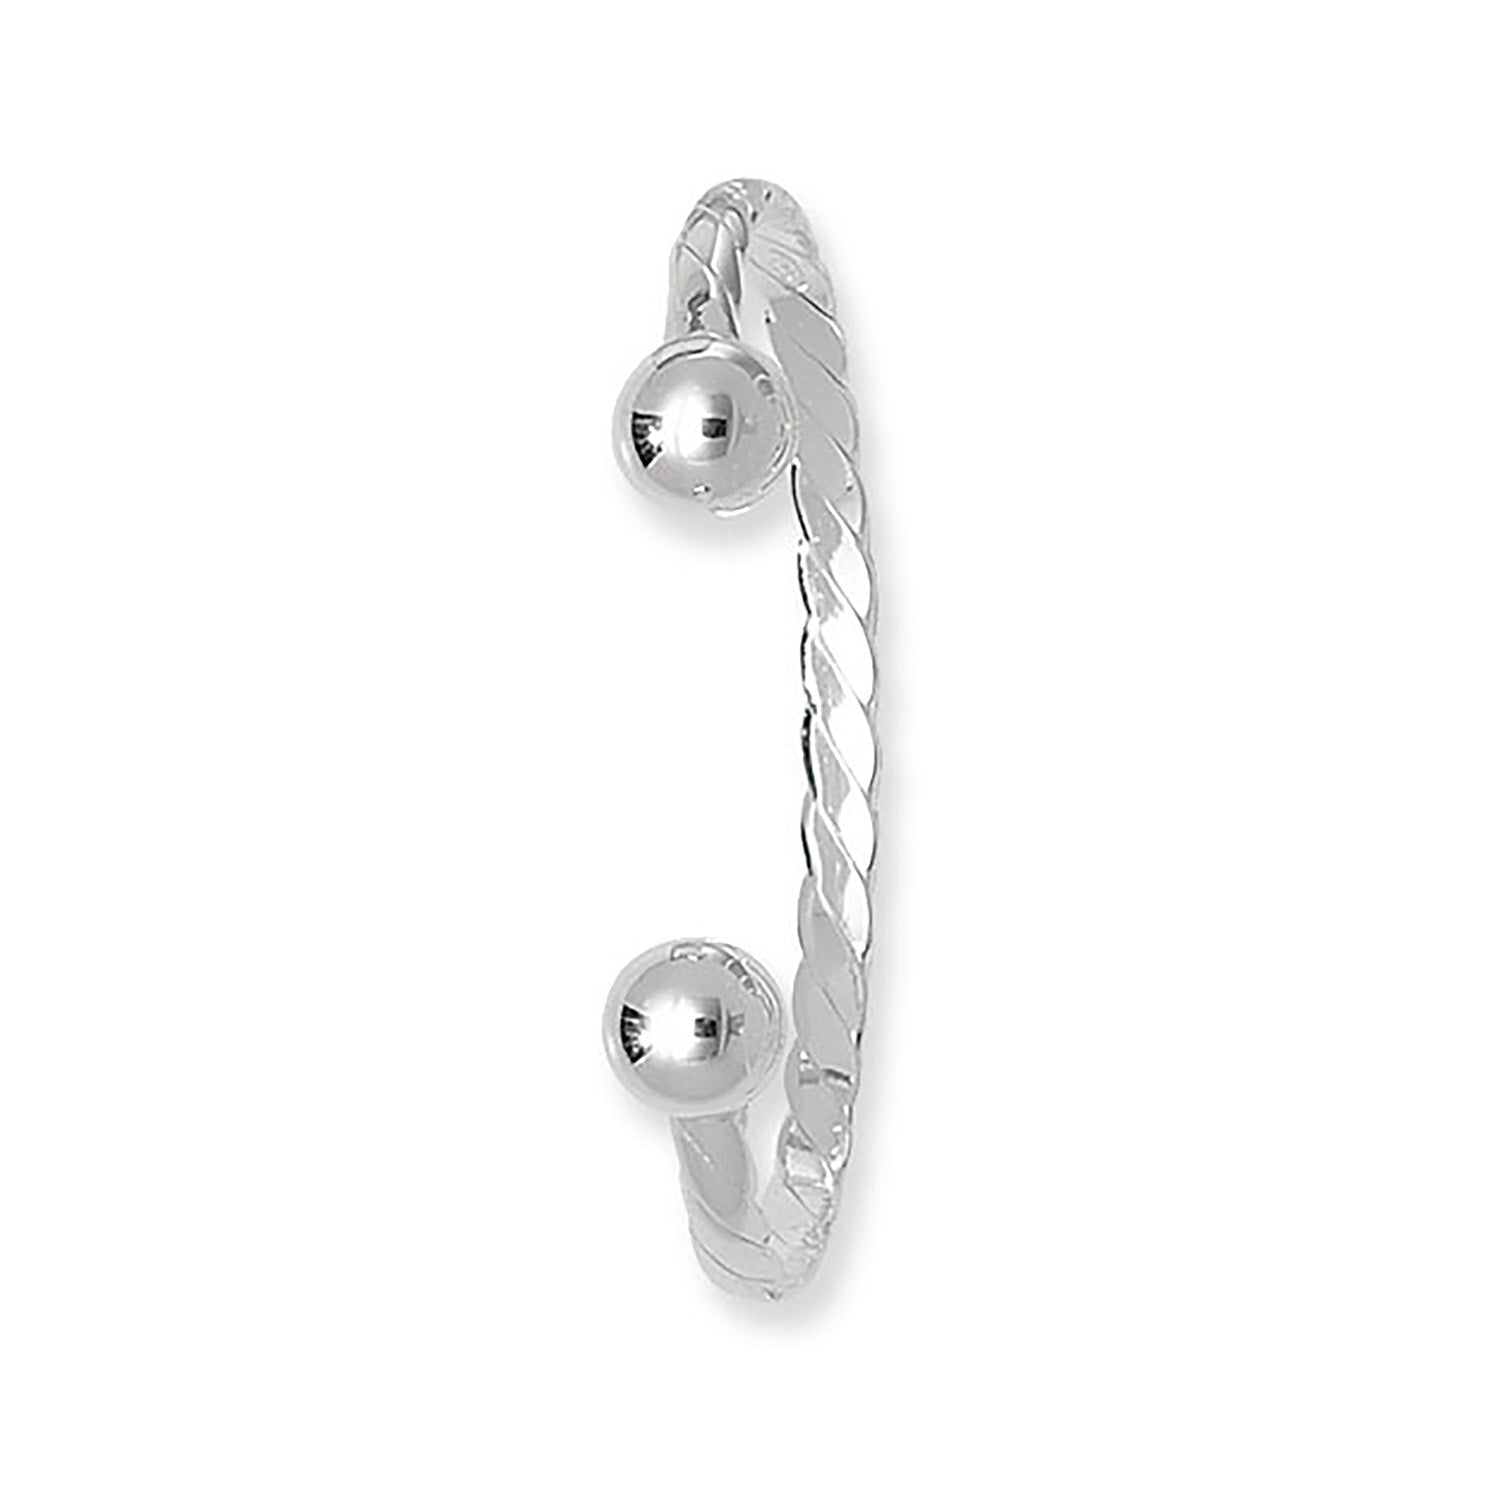 SILVER BABIES' TWISTED TORC BANGLE